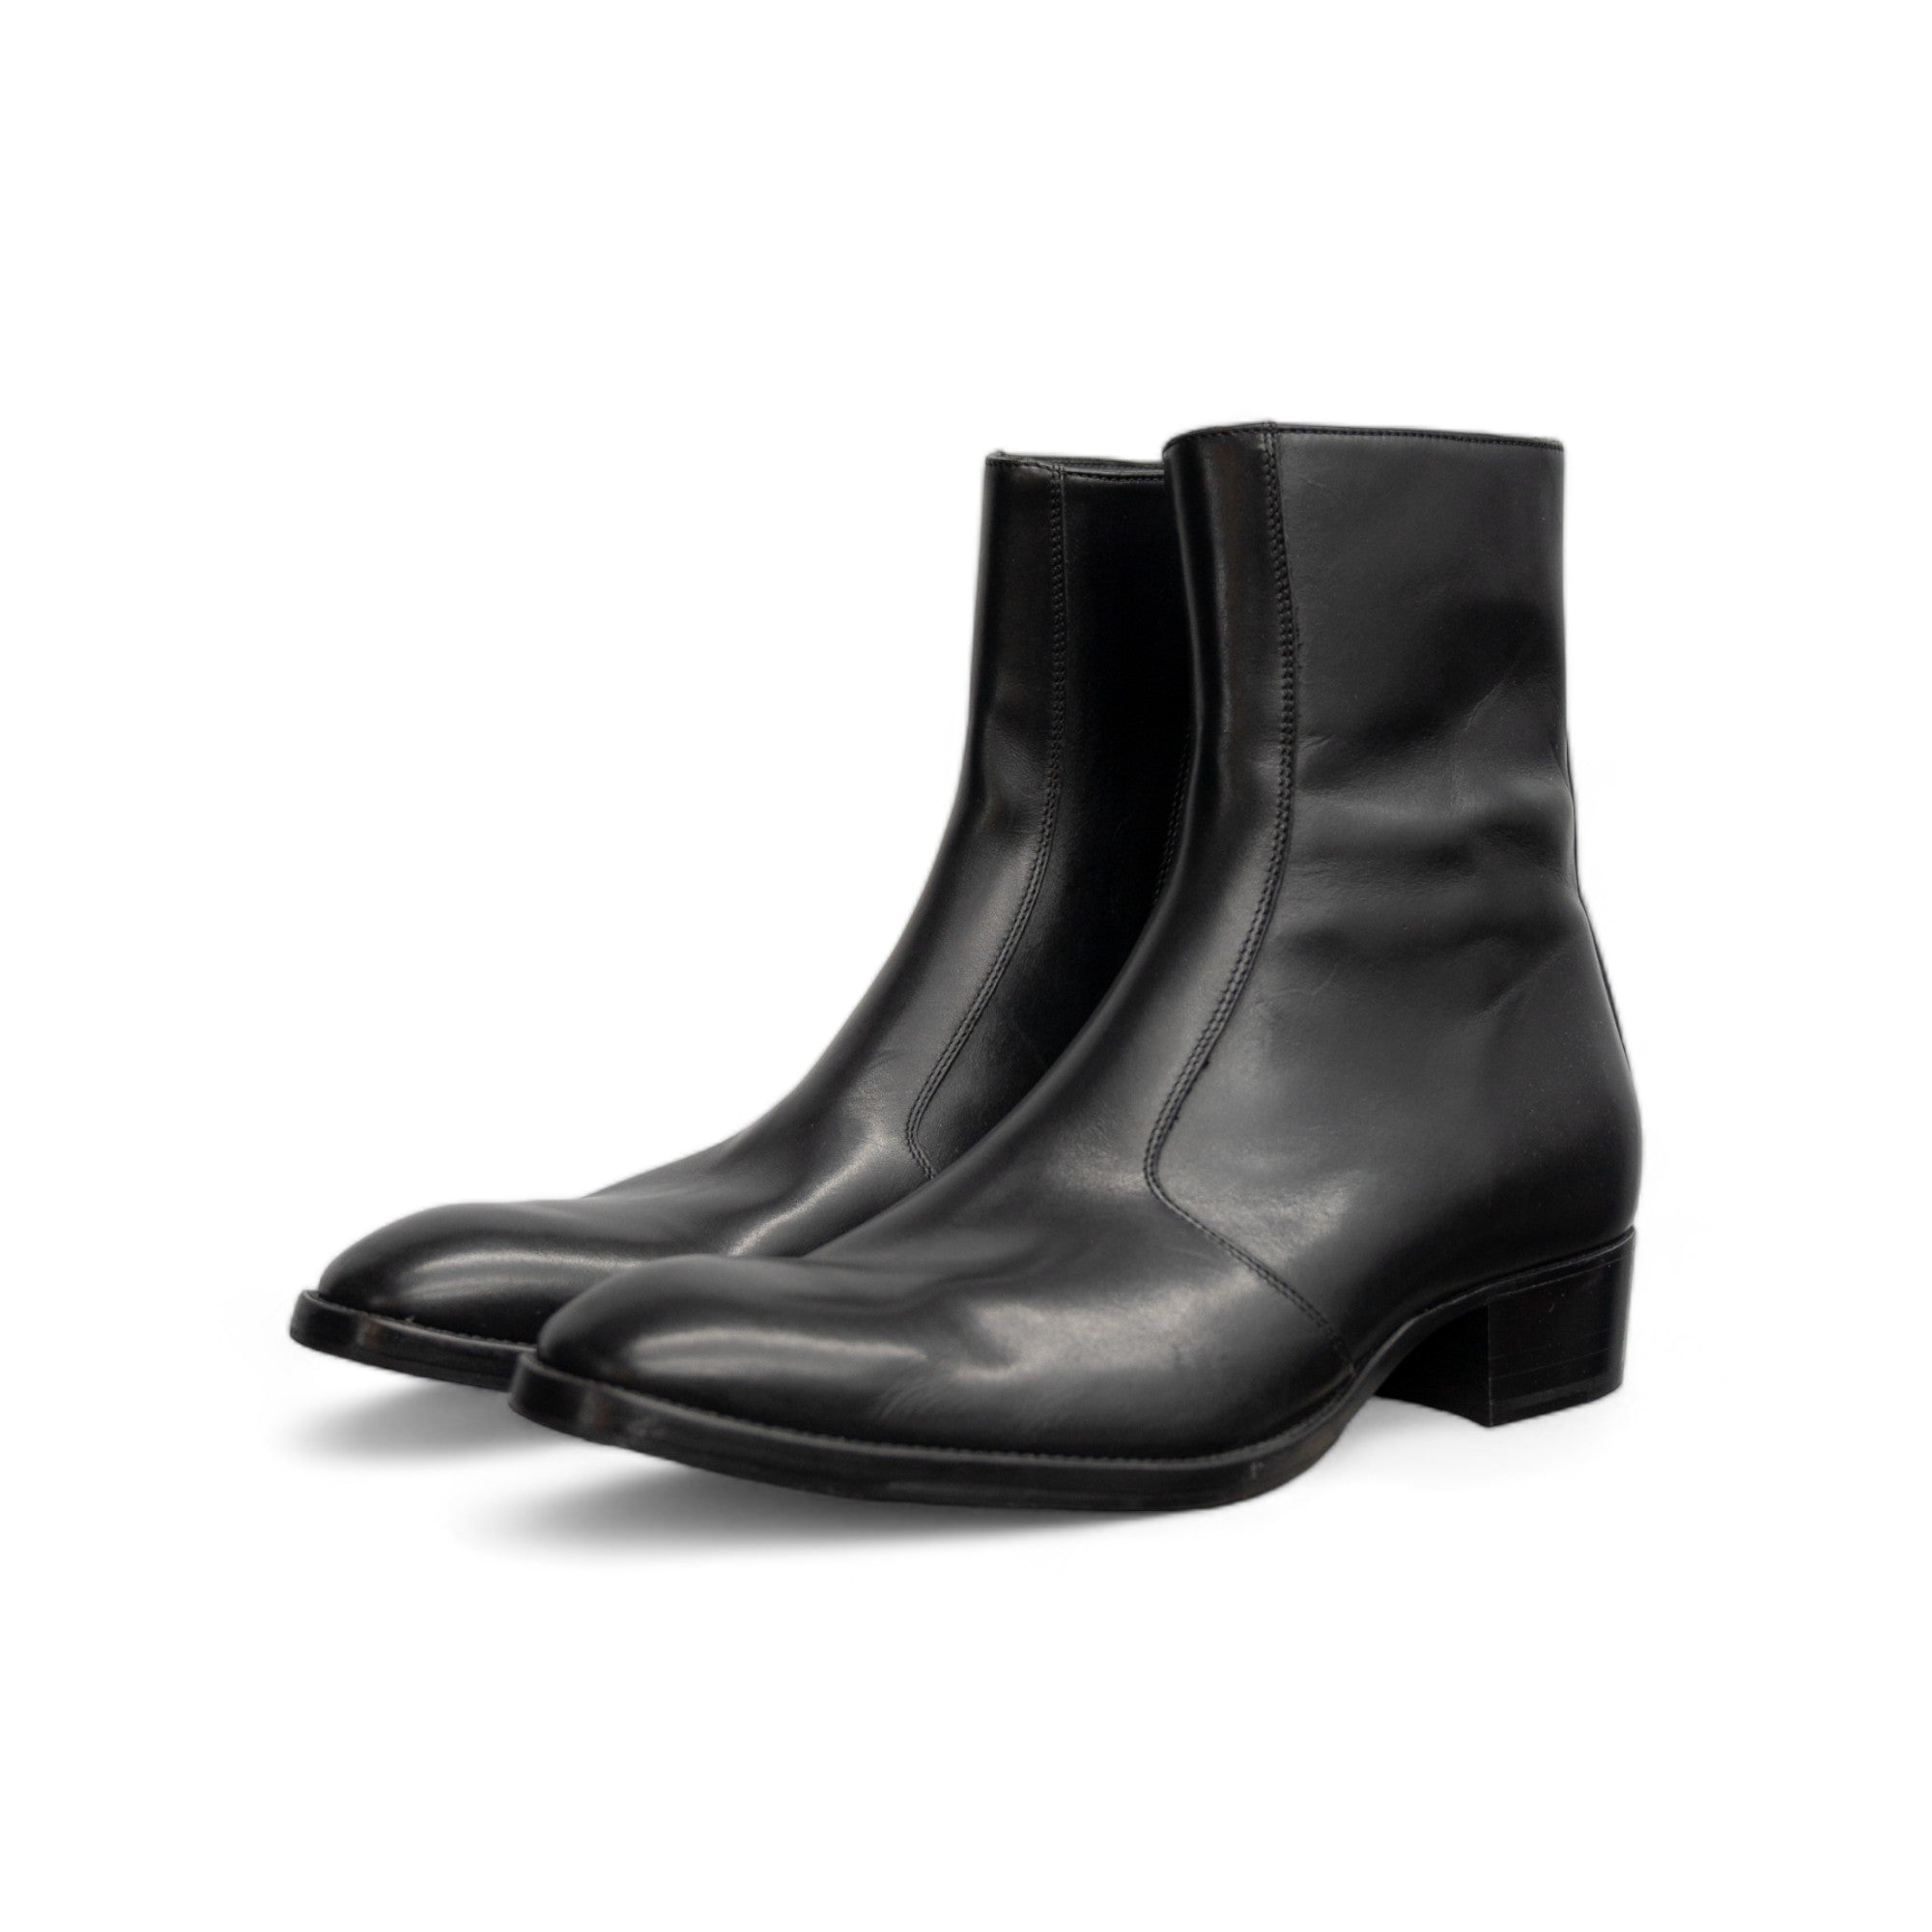 FROMTHEFIRST LUCA 40MM SIDE ZIP BOOT - BLACK LEATHER